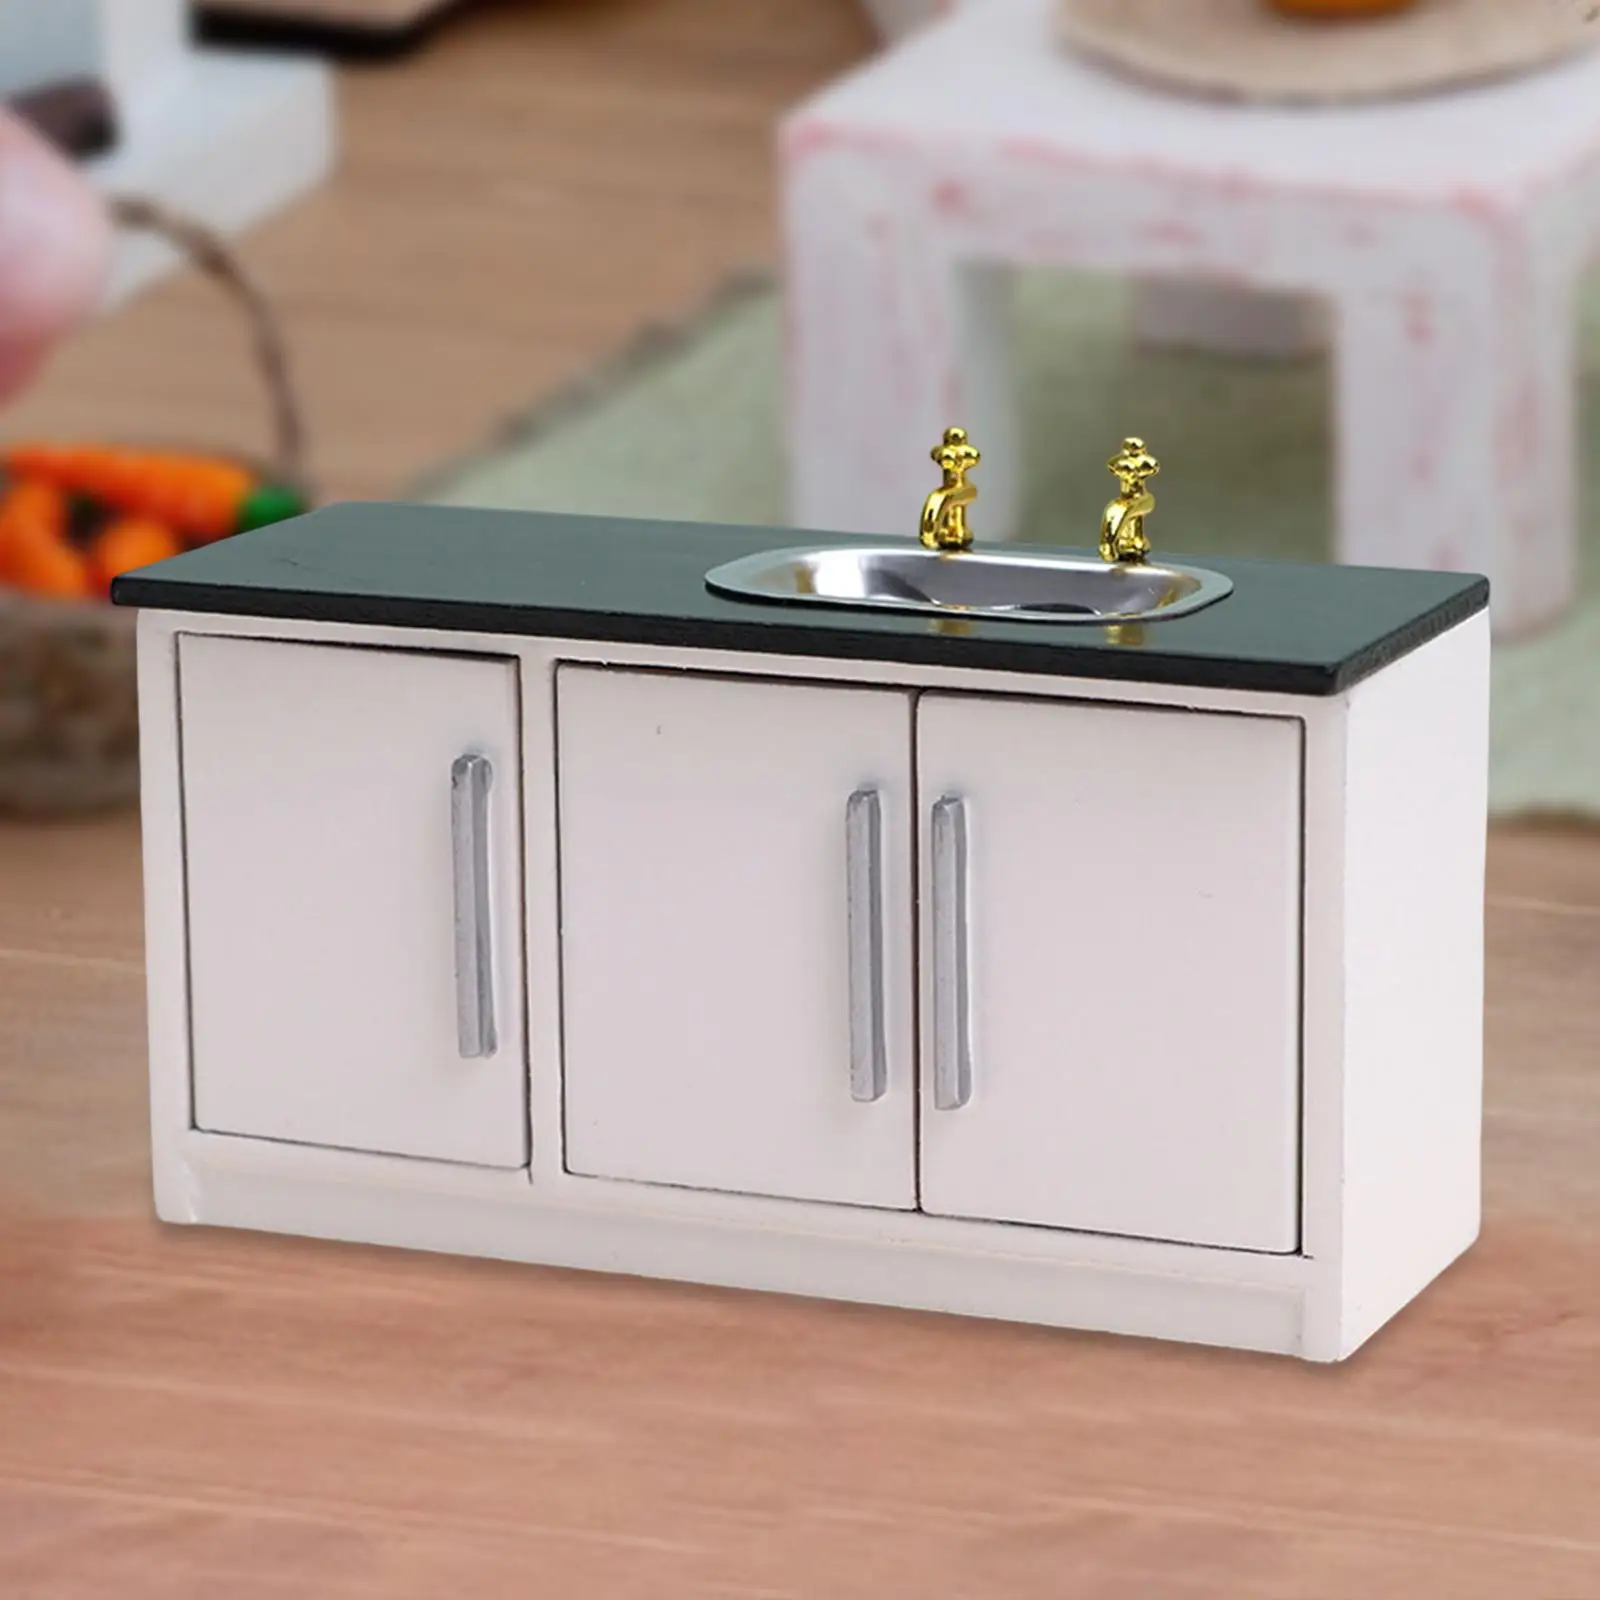 Dollhouse Kitchen Sink Dollhouse Cupboard for Photography Props Pretend Play Children